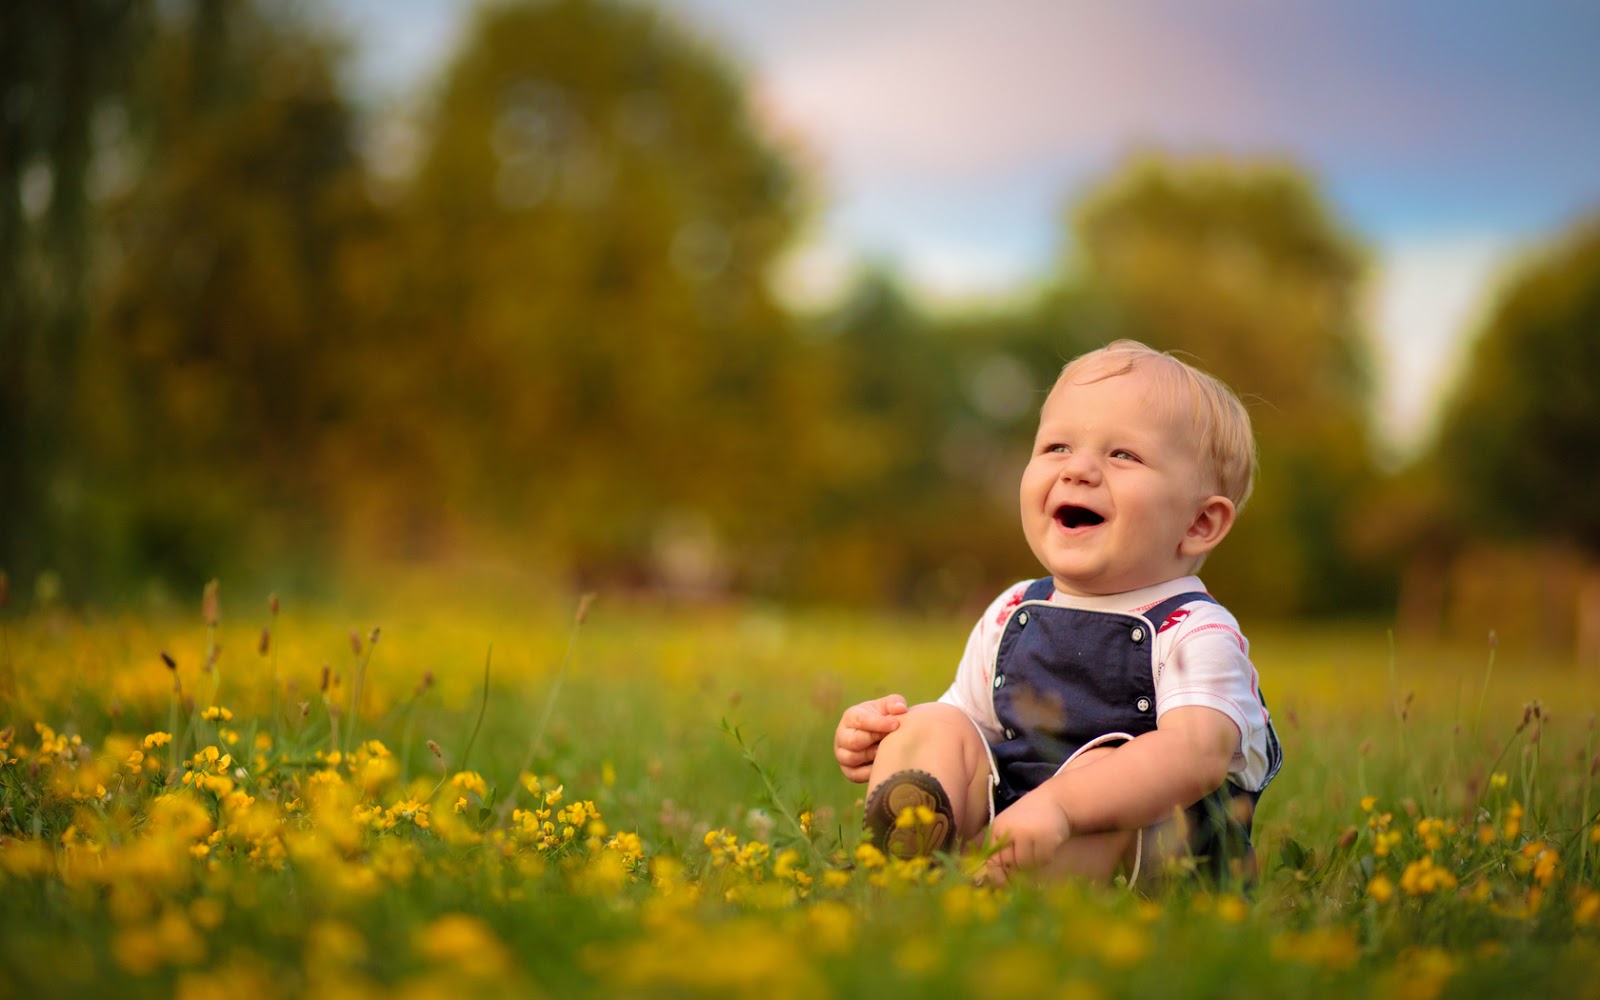 Free download Cute Baby Smile HD Wallpapers of Smiling Baby iMage ...